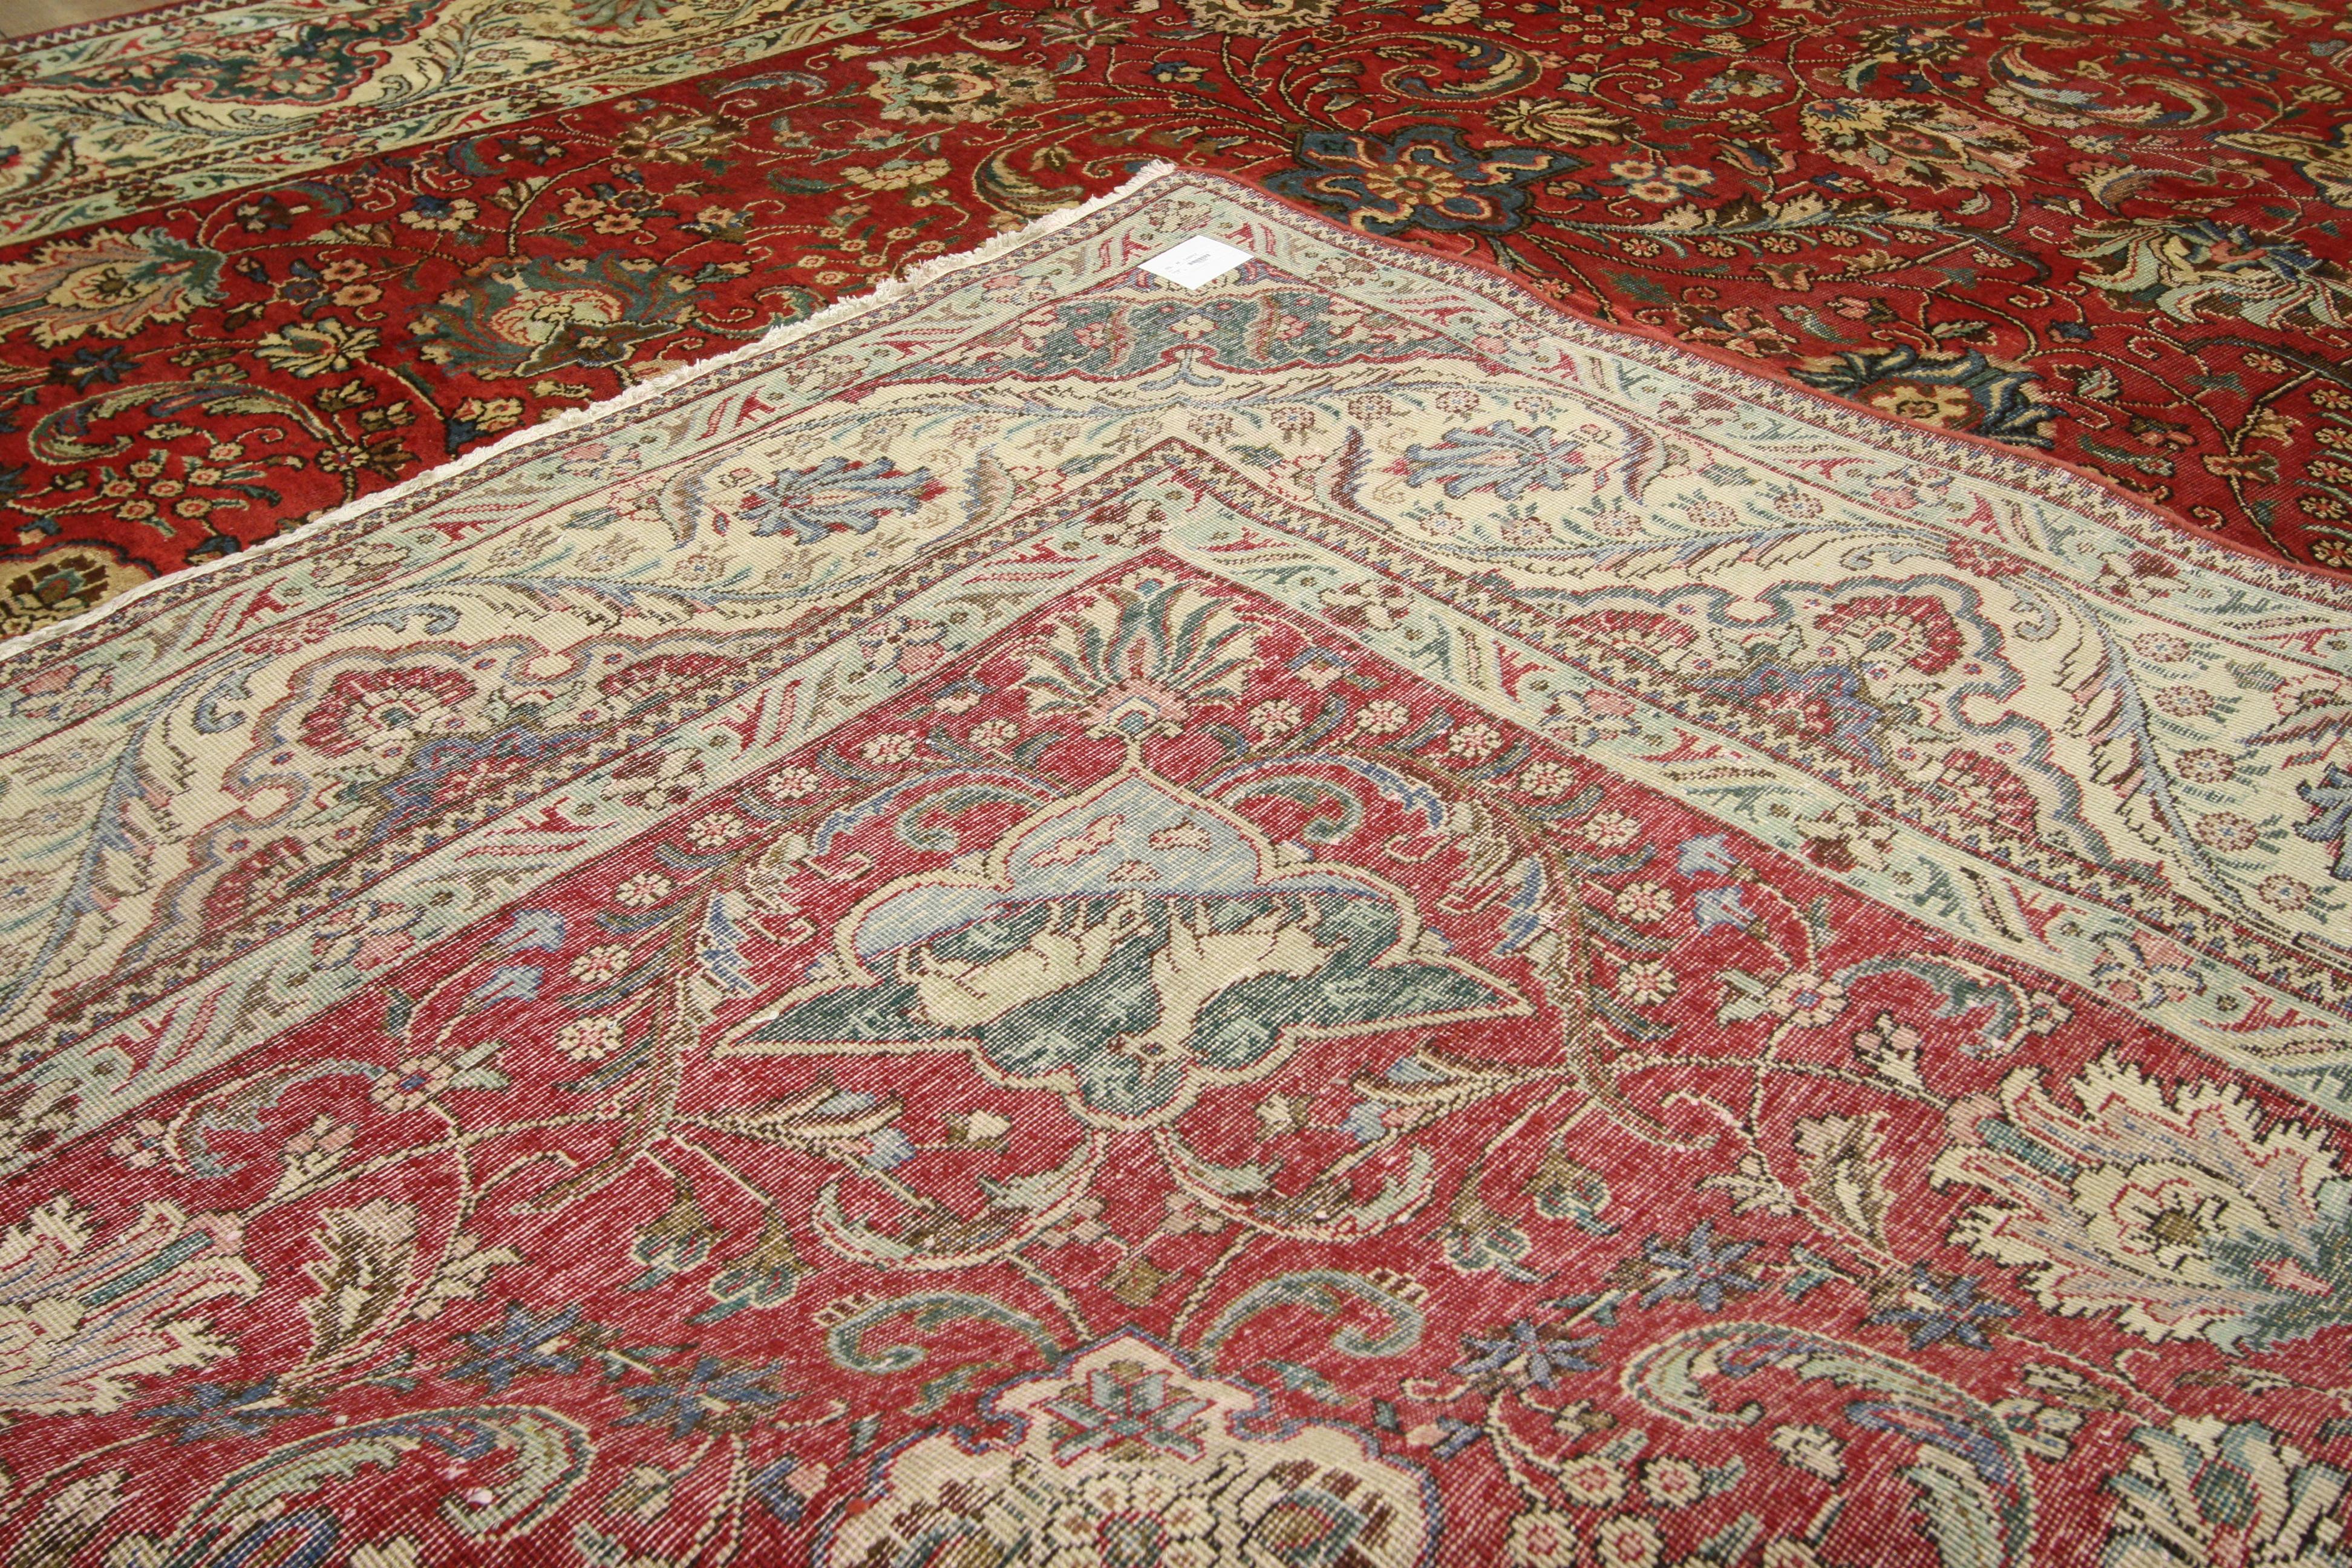 76280 Vintage Persian Tabriz Area Rug with Traditional Colonial and Federal Style. This hand-knotted wool vintage Persian Tabriz rug features an all-over pattern surrounded by a classic border creating a well-balanced and timeless design. This